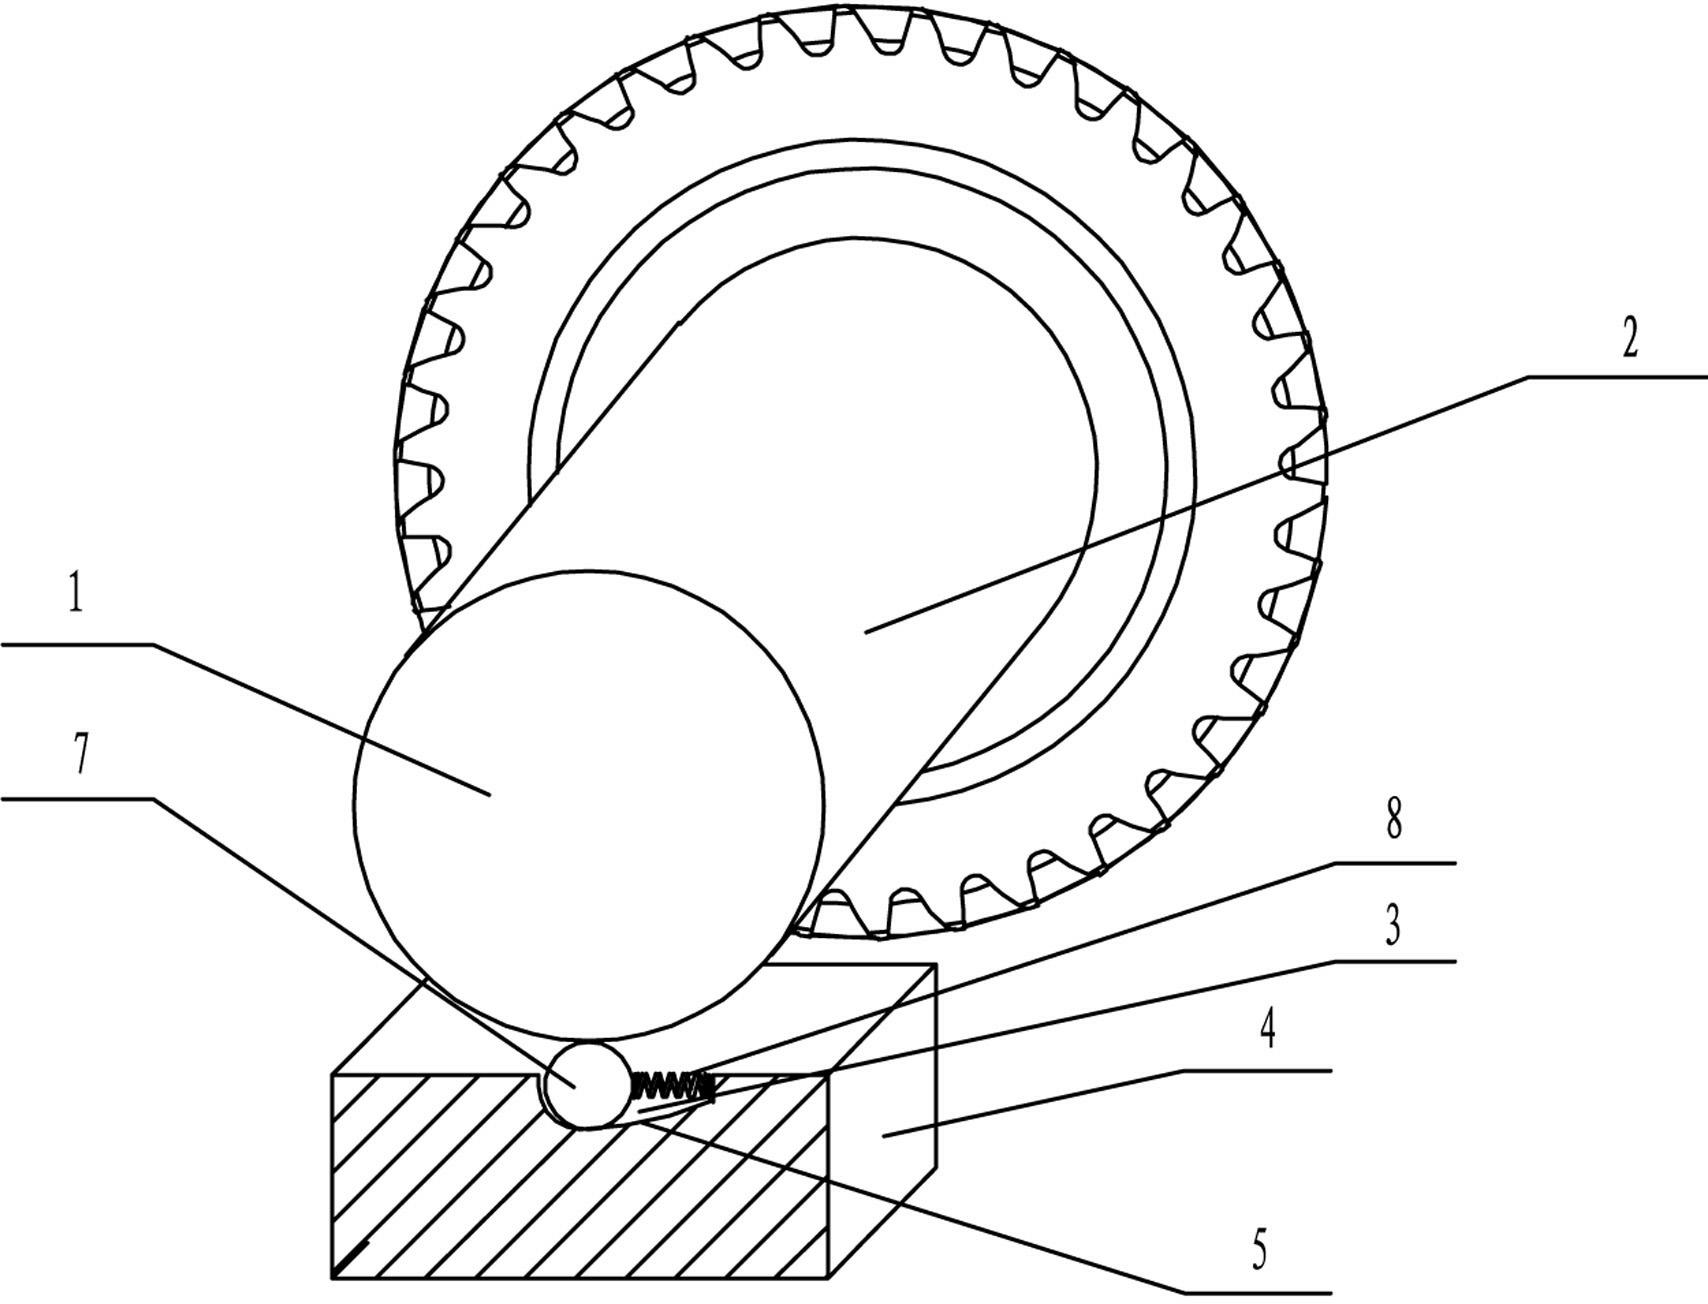 Vibration reduction device of rotating elements